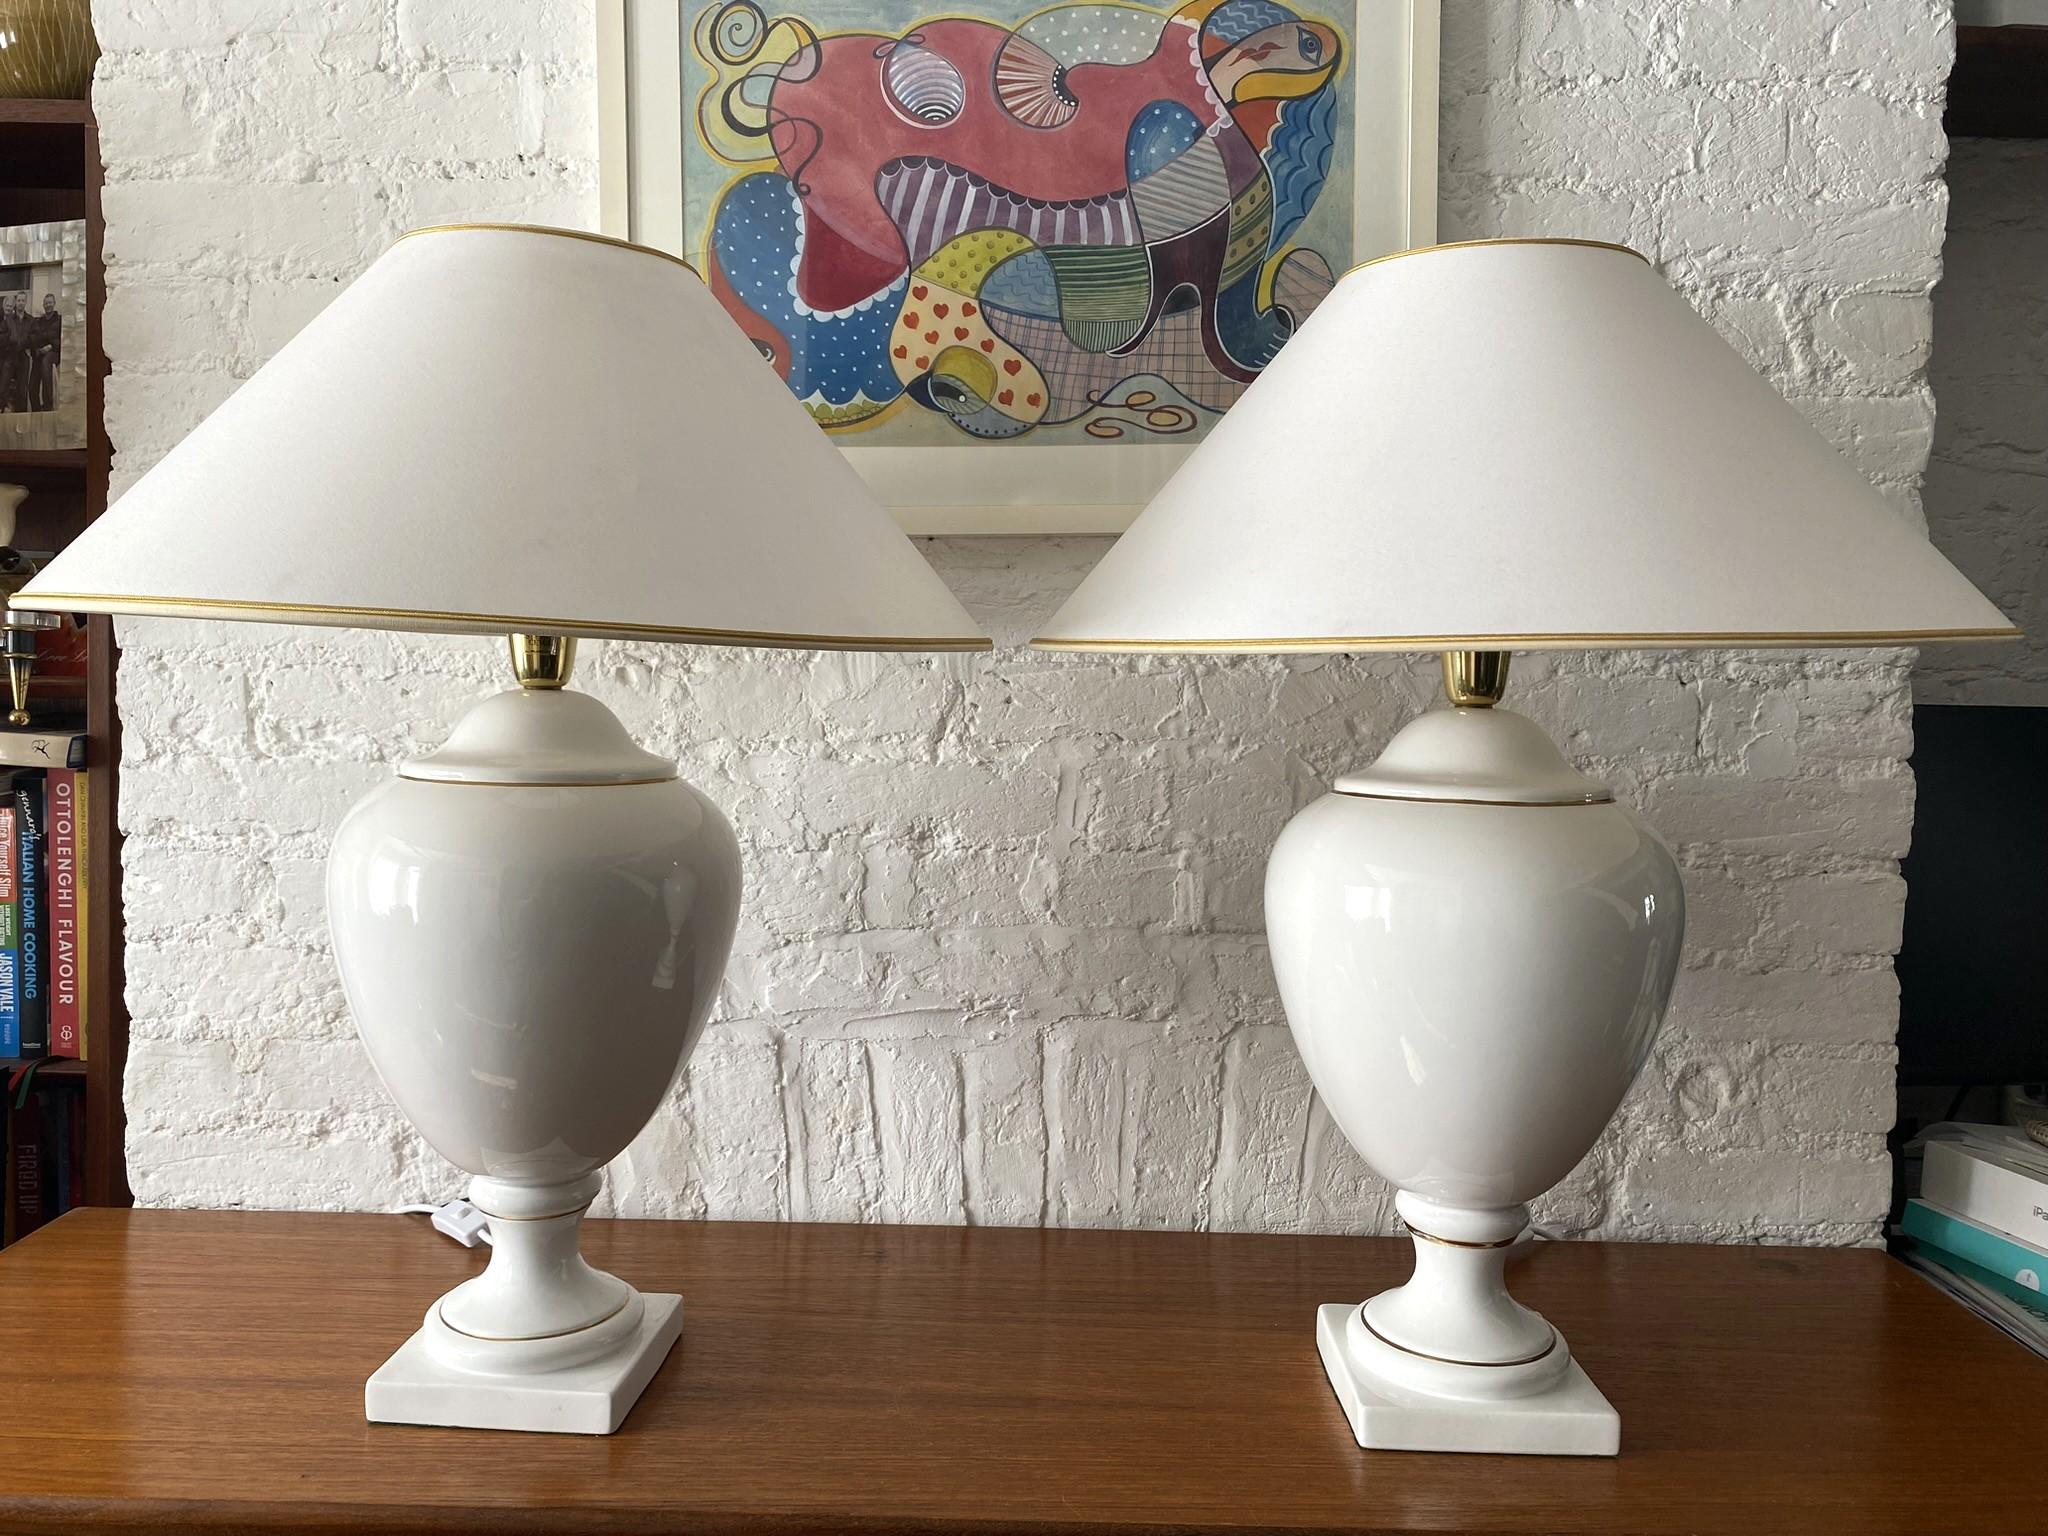 Pair of White & Gold Ceramic Table Lamps & Shades by Stefano Cevoli, Italian, 1980s

Vintage pair of white ceramic table lamps with gold accents, including shades that have a gold simple braid around the top and bottom rim of shade. Designed by